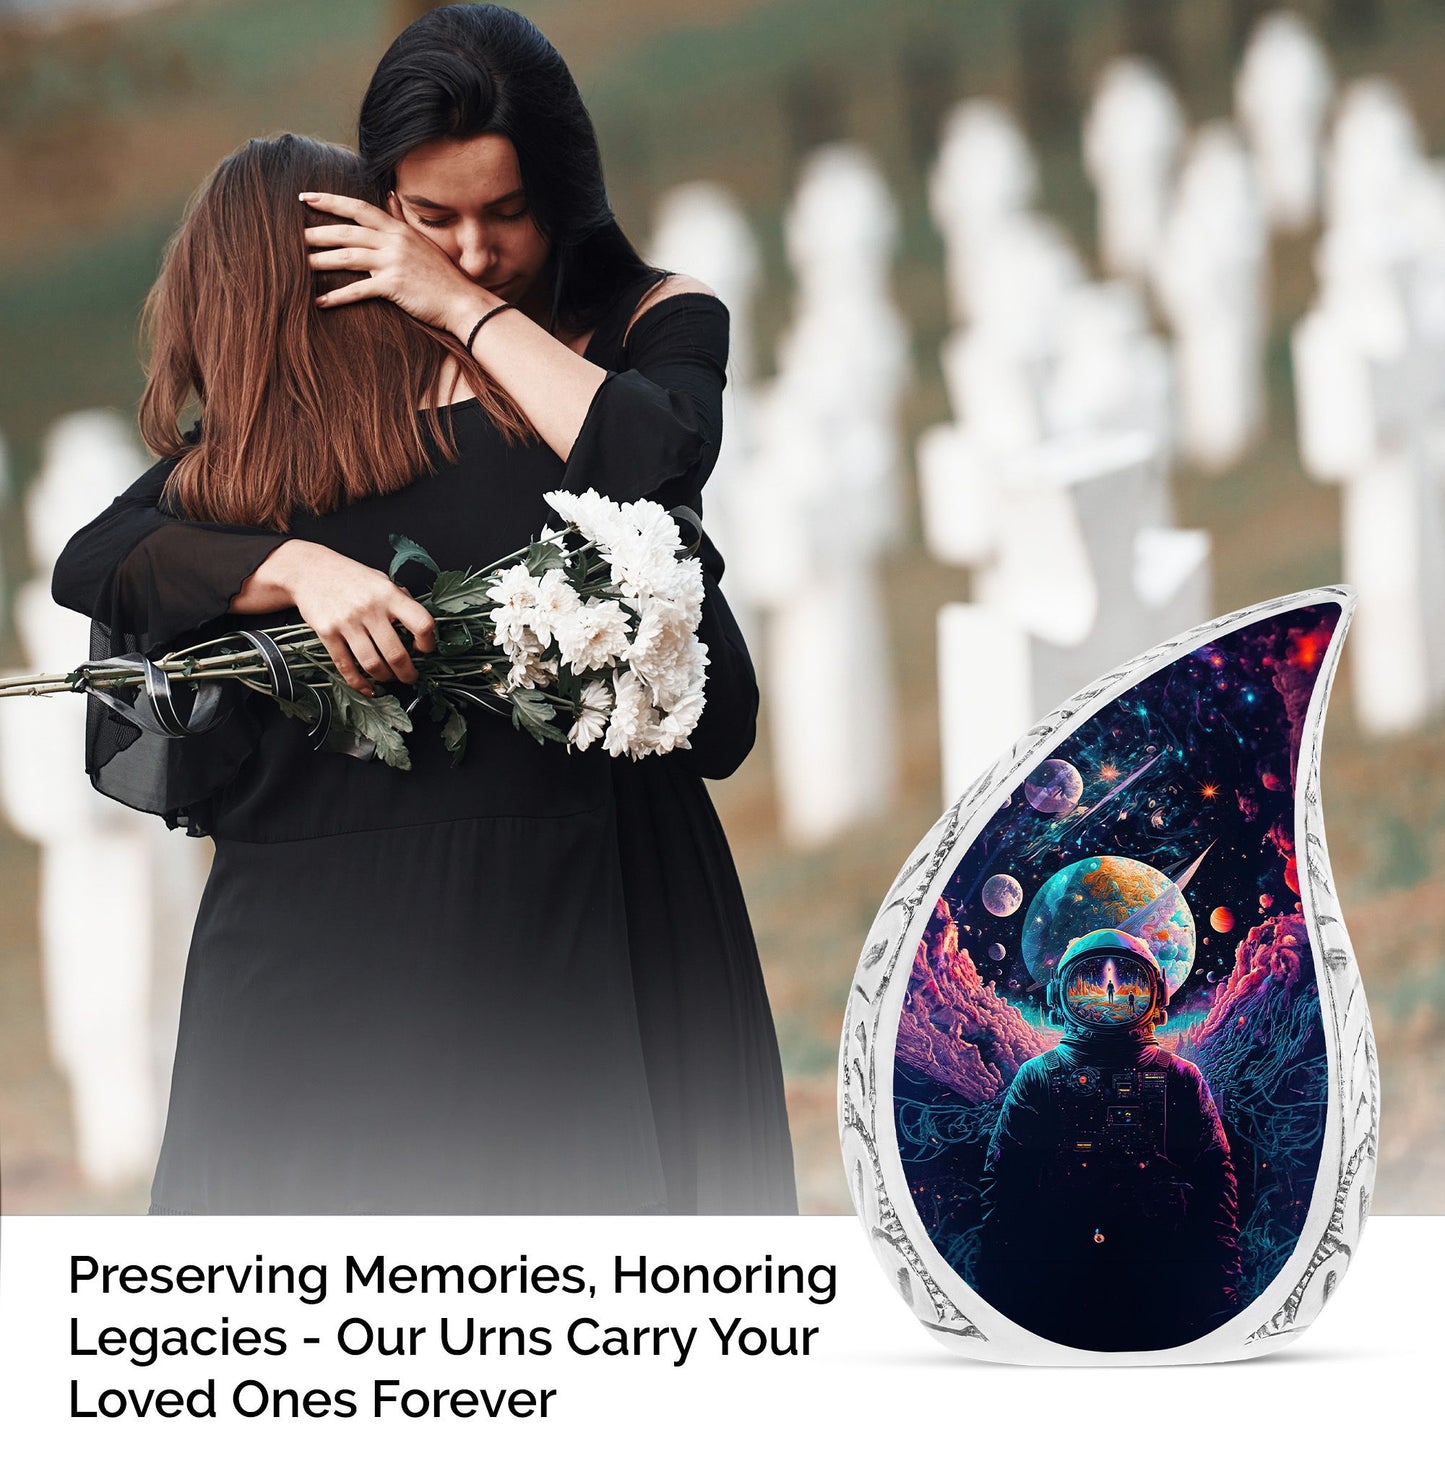 Large urn for adult male ashes featuring space scene with astronaut, ideal for funeral or cremation